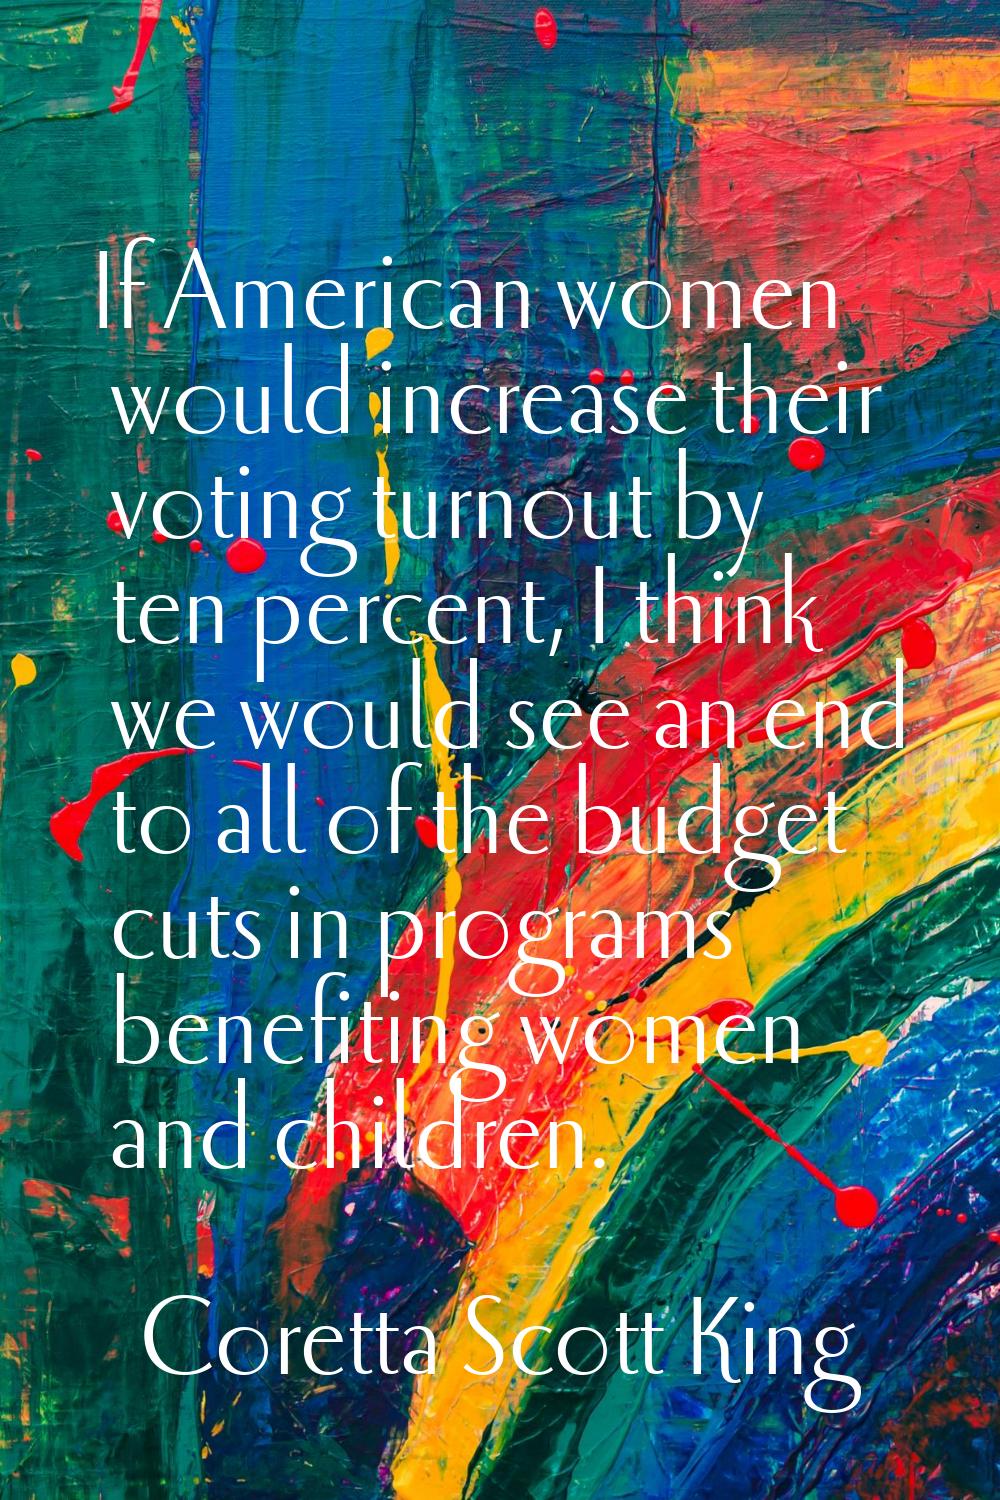 If American women would increase their voting turnout by ten percent, I think we would see an end t